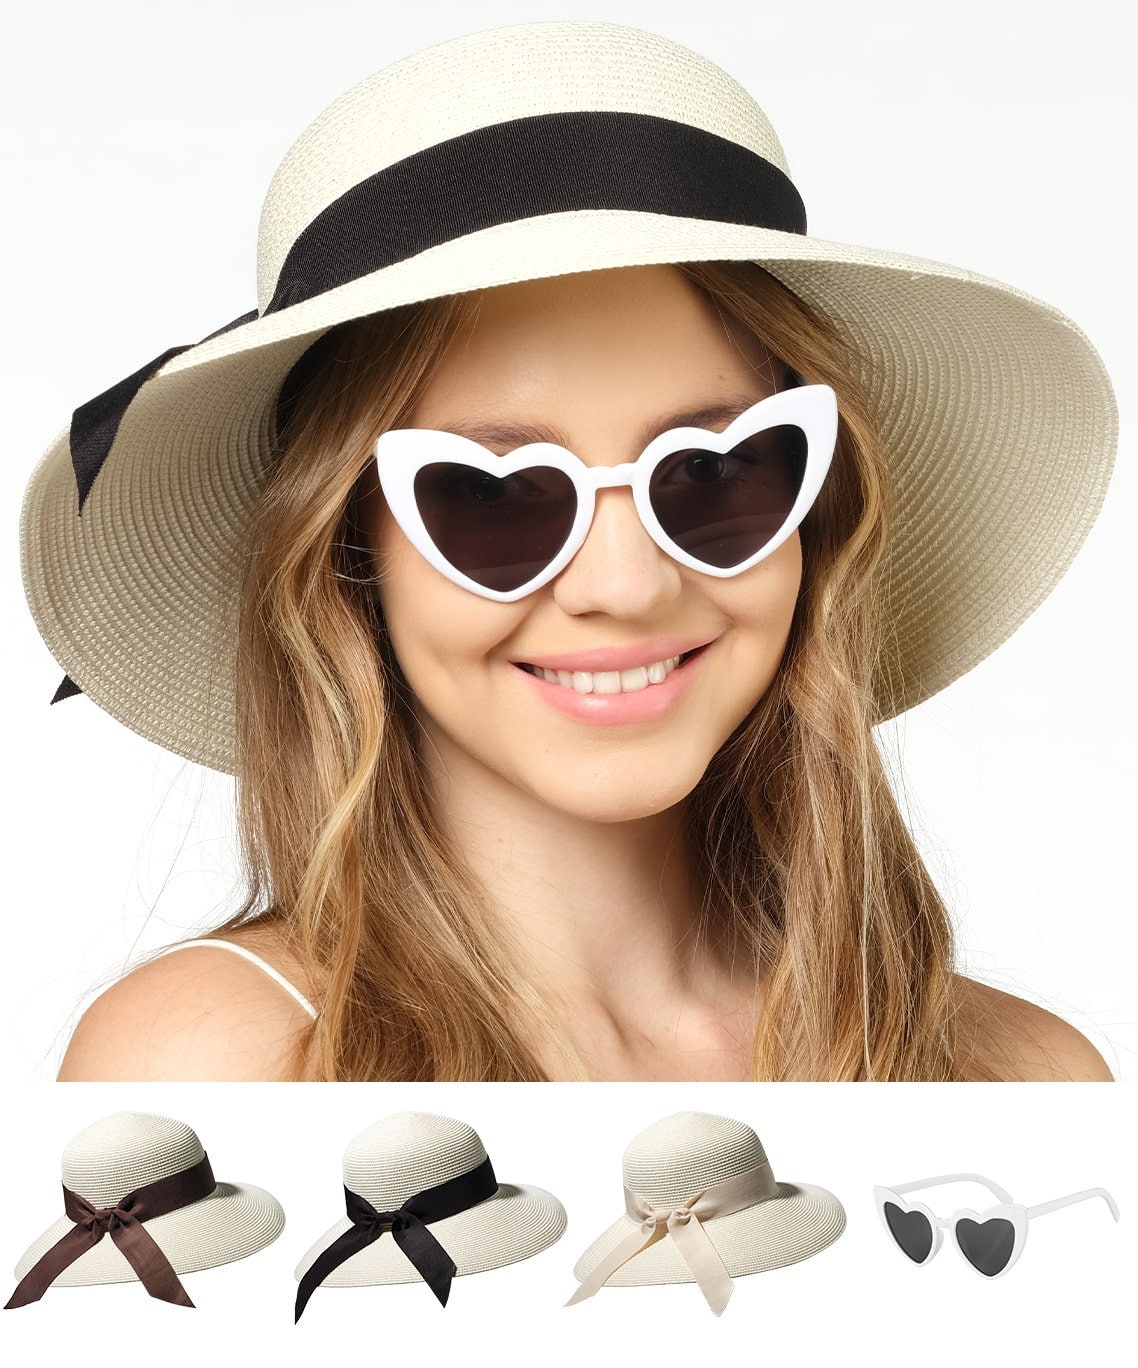 Funcredible Beach Hats for Women - Panama Straw Sun Hat with Heart Shape Glasses - Summer Fedora Roll Up Packable Hat UPF 50+ (ivory)